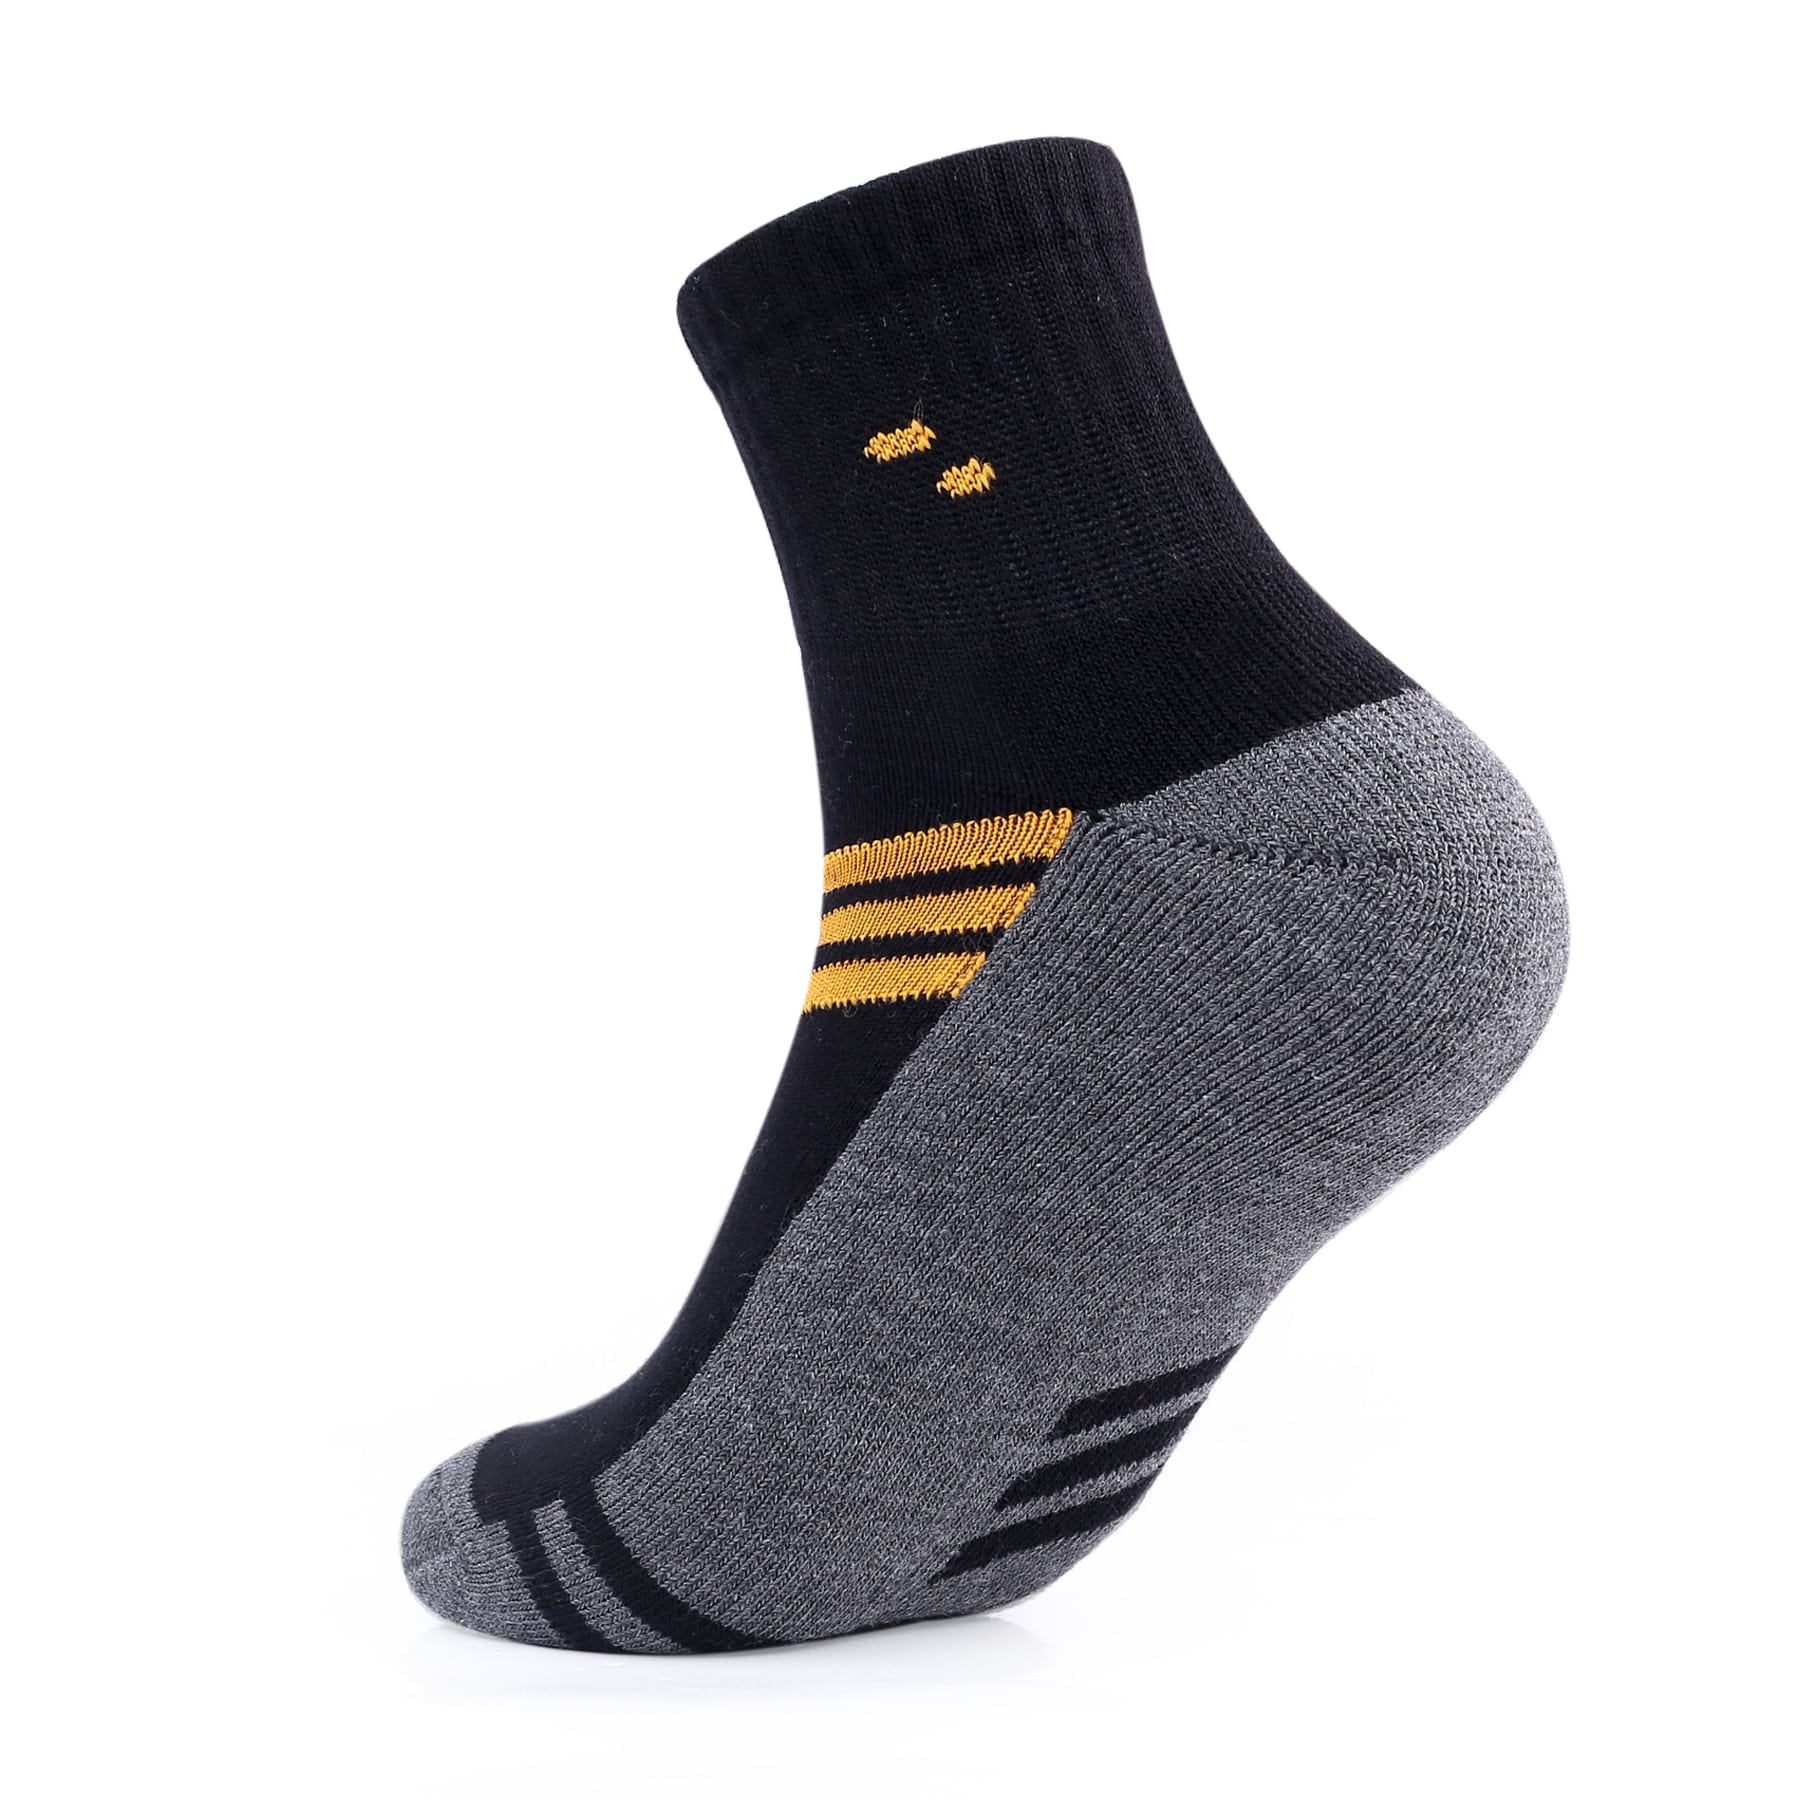 Combo of a 2 pair Sports Terry Socks